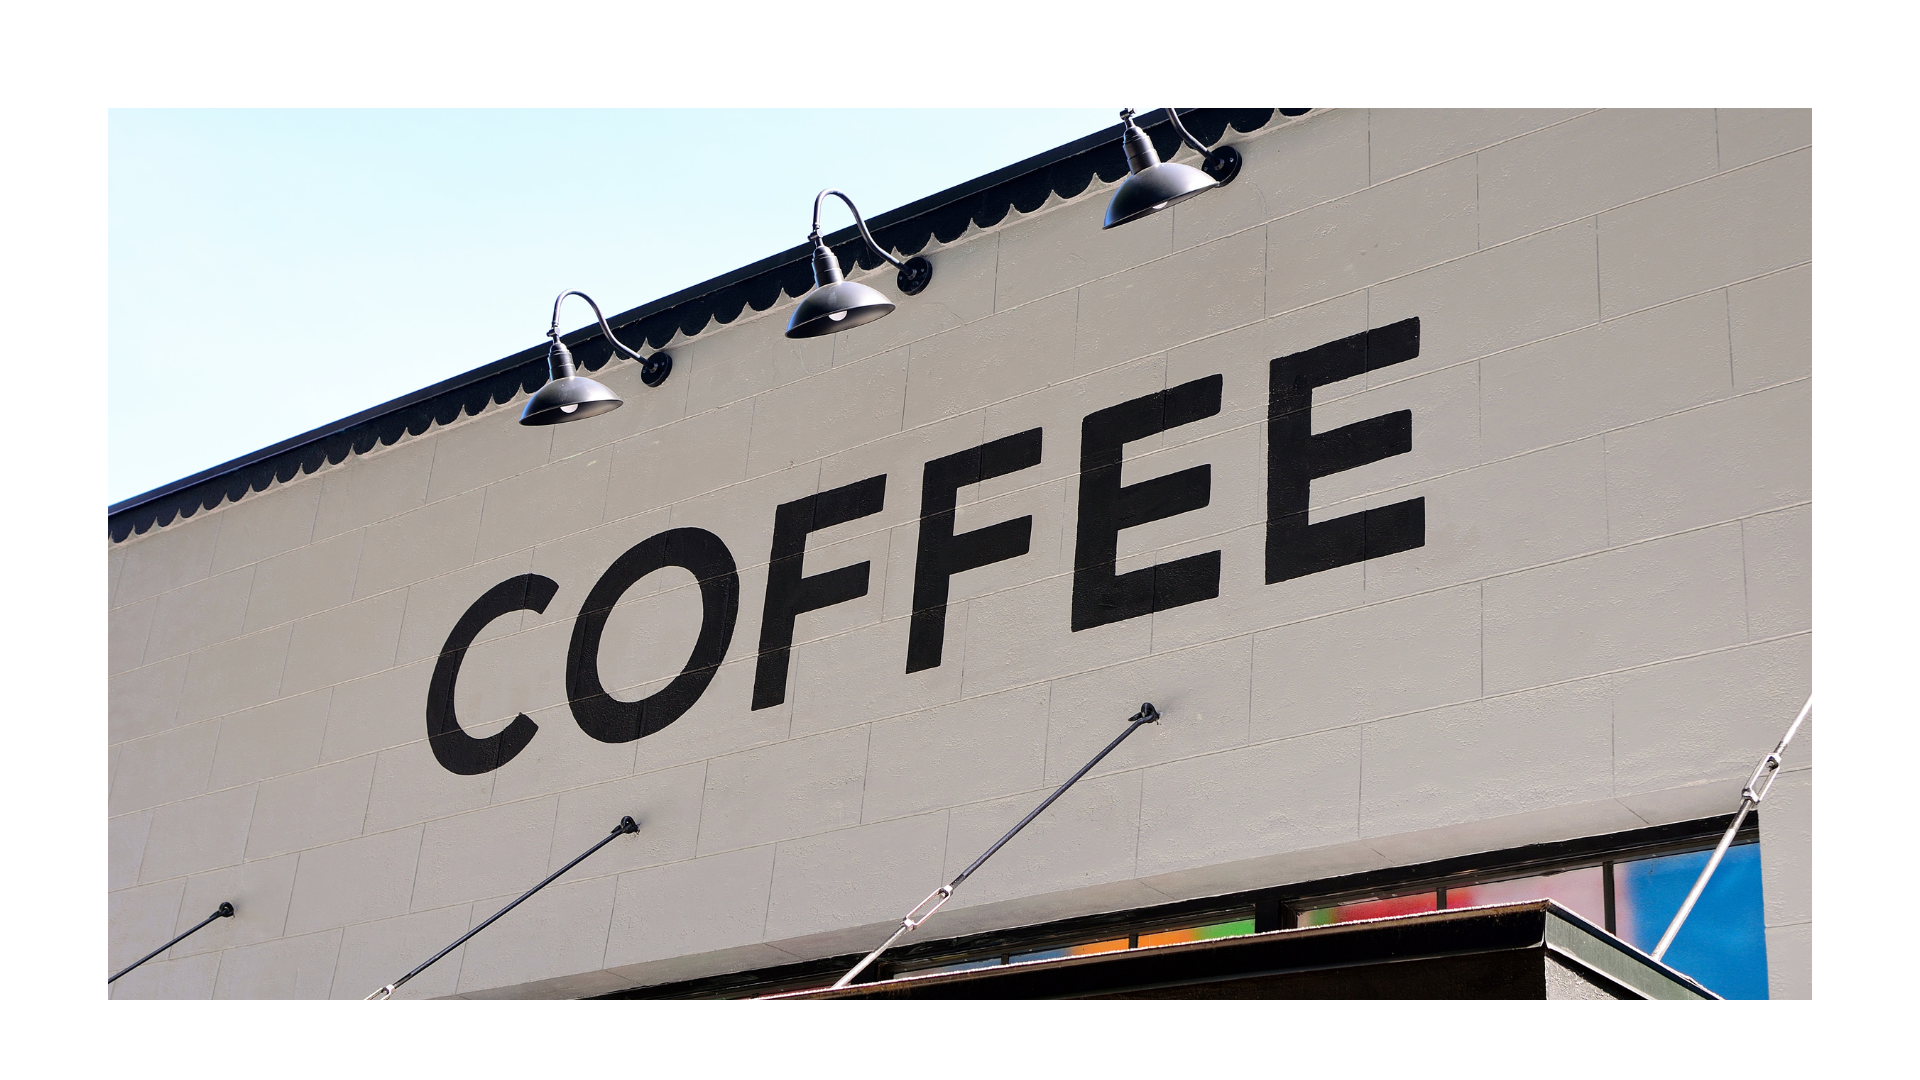 Sign with black letters on a white building that reads "COFFEE"